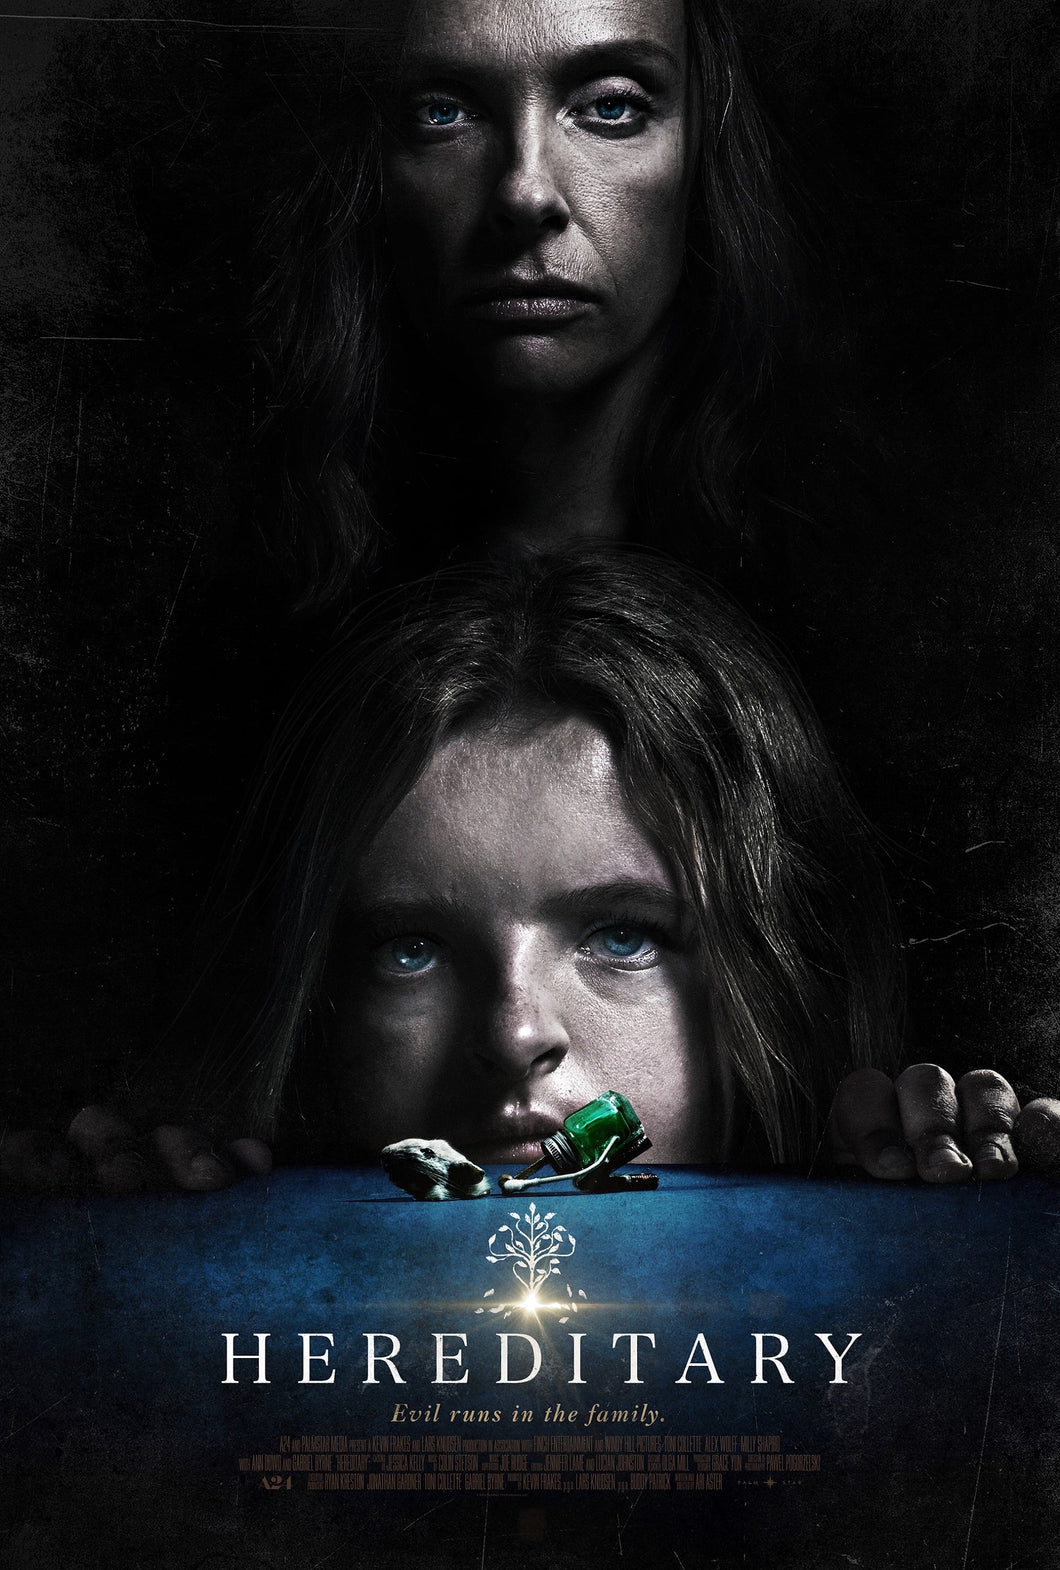 Hereditary (2018) Movie Poster Framed or Unframed Glossy Poster Free UK Shipping!!!